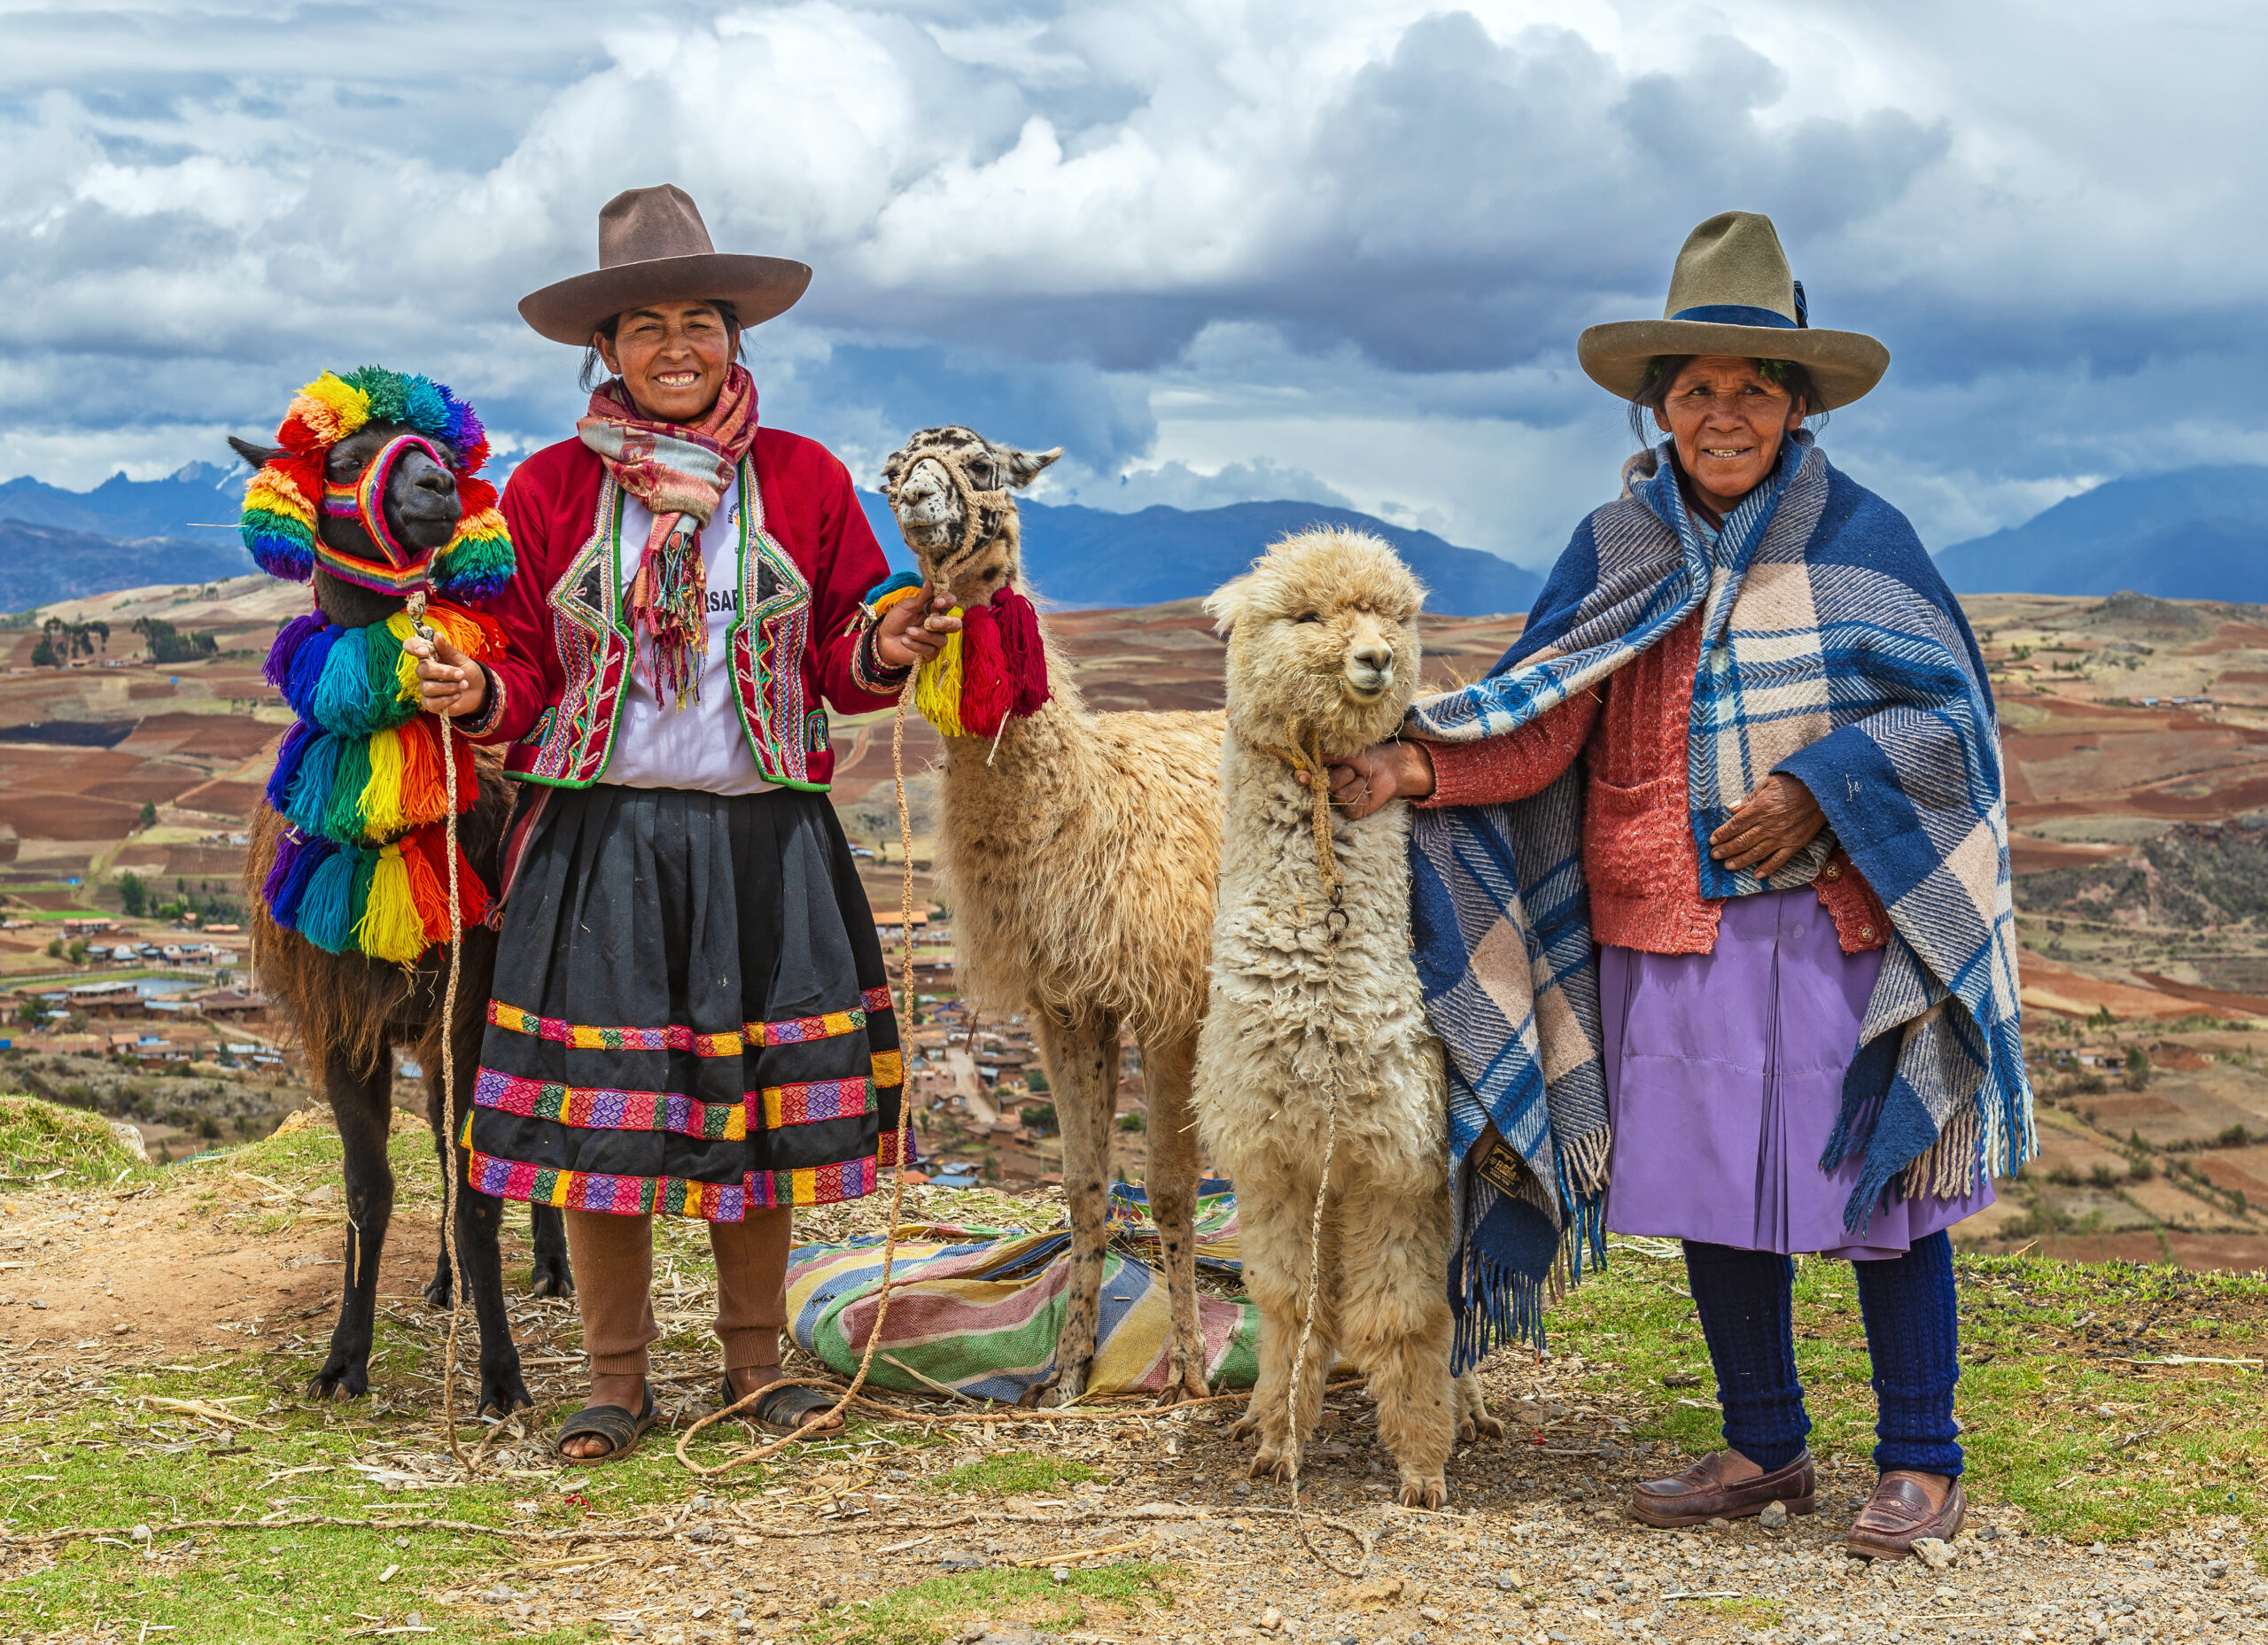 Rural portrait of Quechua Indigenous Women in traditional clothes with their domestic animals, two llama and one alpaca, Sacred Valley, Cusco, Peru.